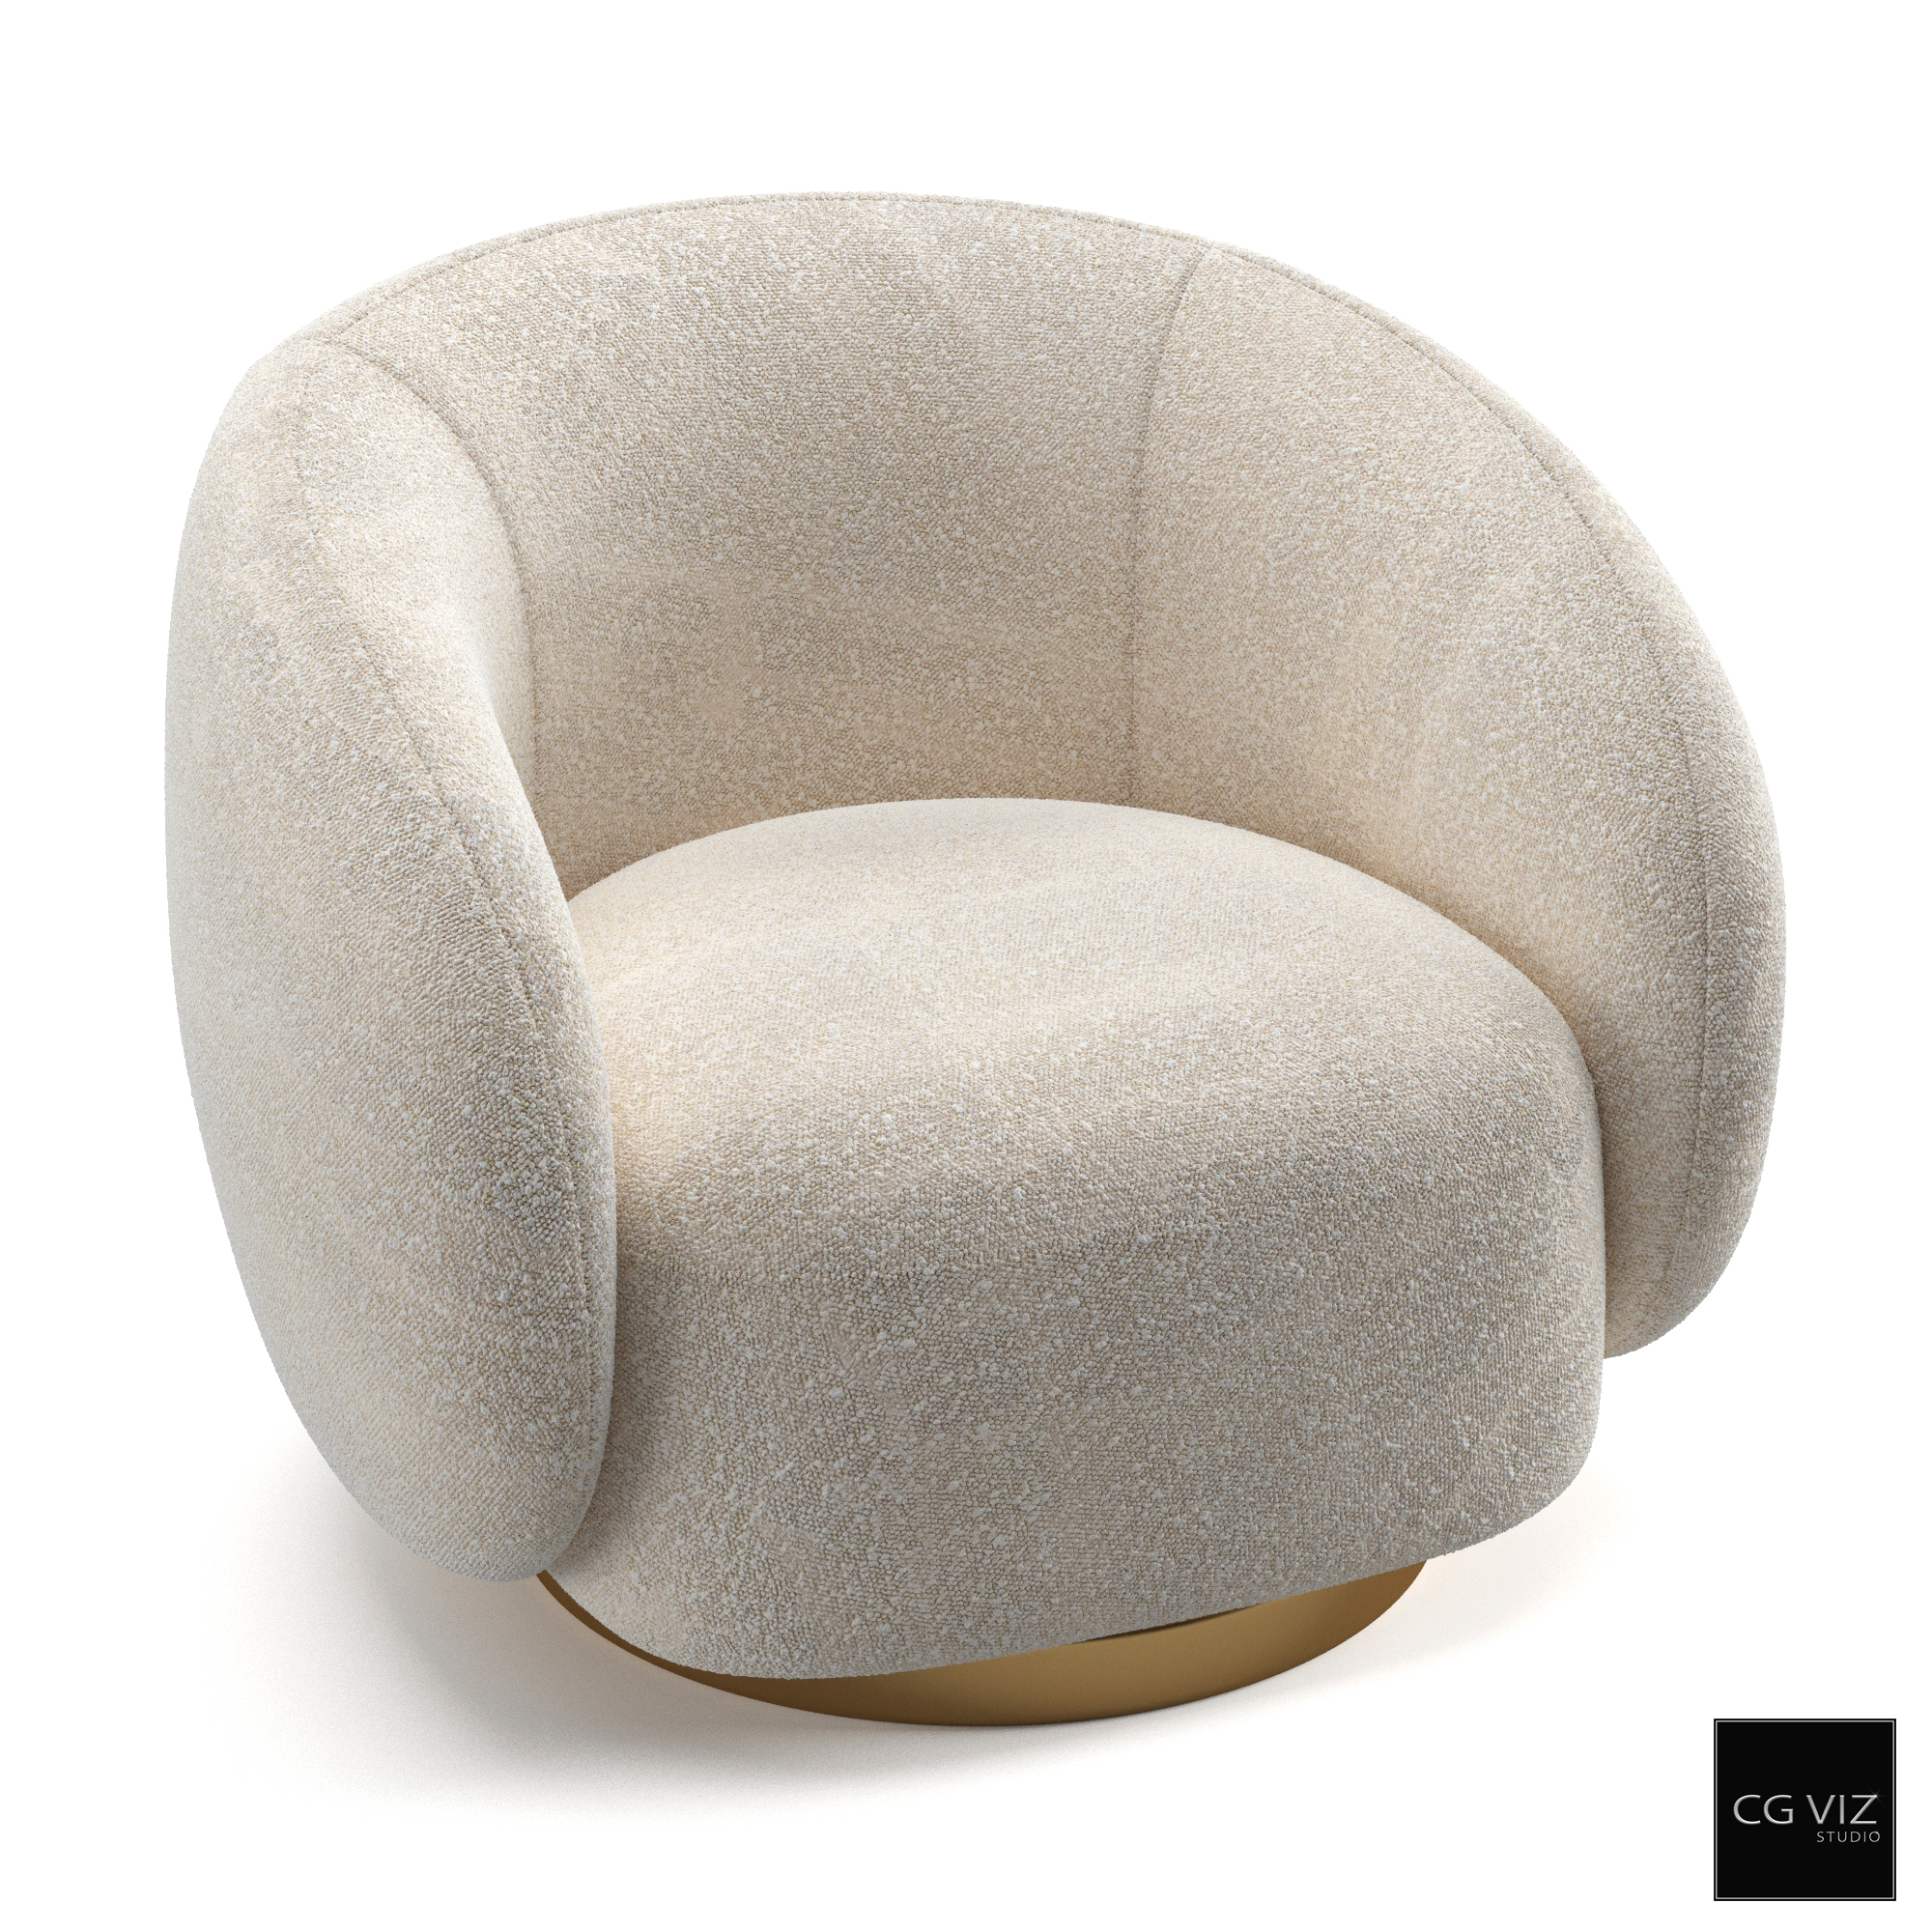 Rendered Preview of Eichholtz Swivel Chair Brice Armchair 3D Model